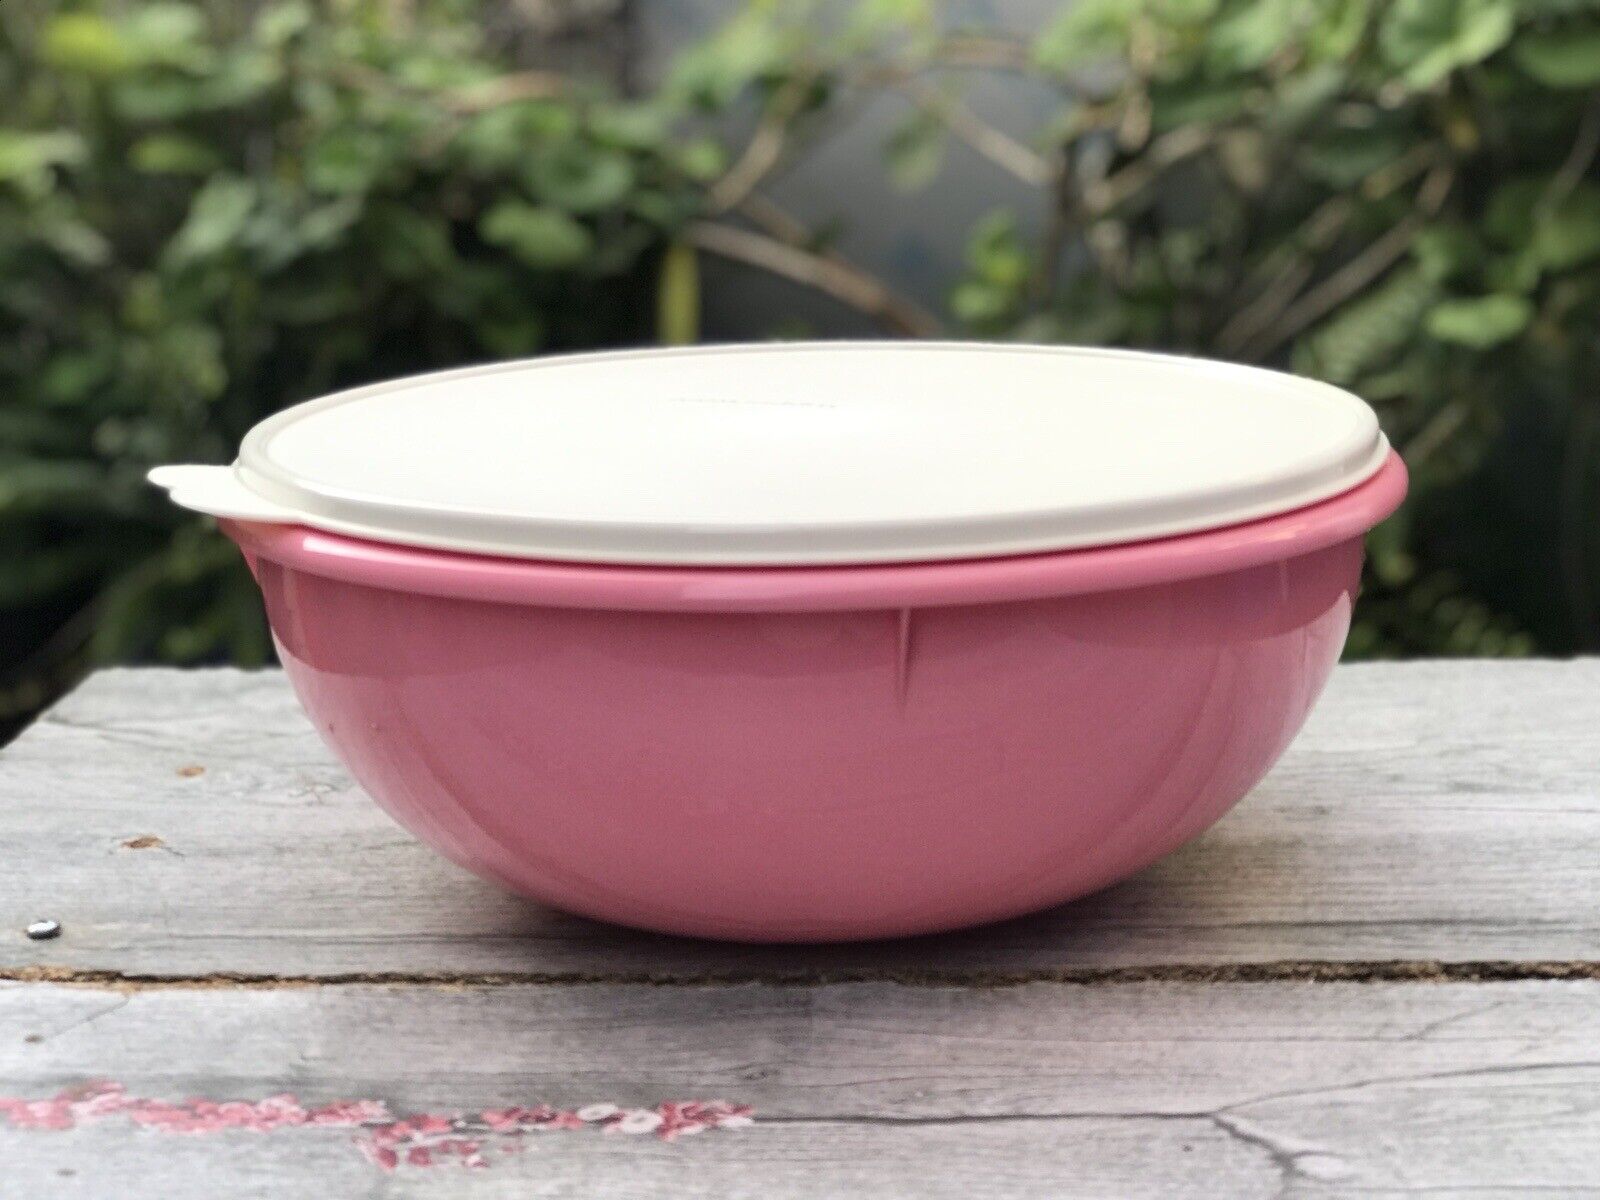 Tupperware Classic Fix-n-mix Bowl 26 Cup with white color seal - Pink